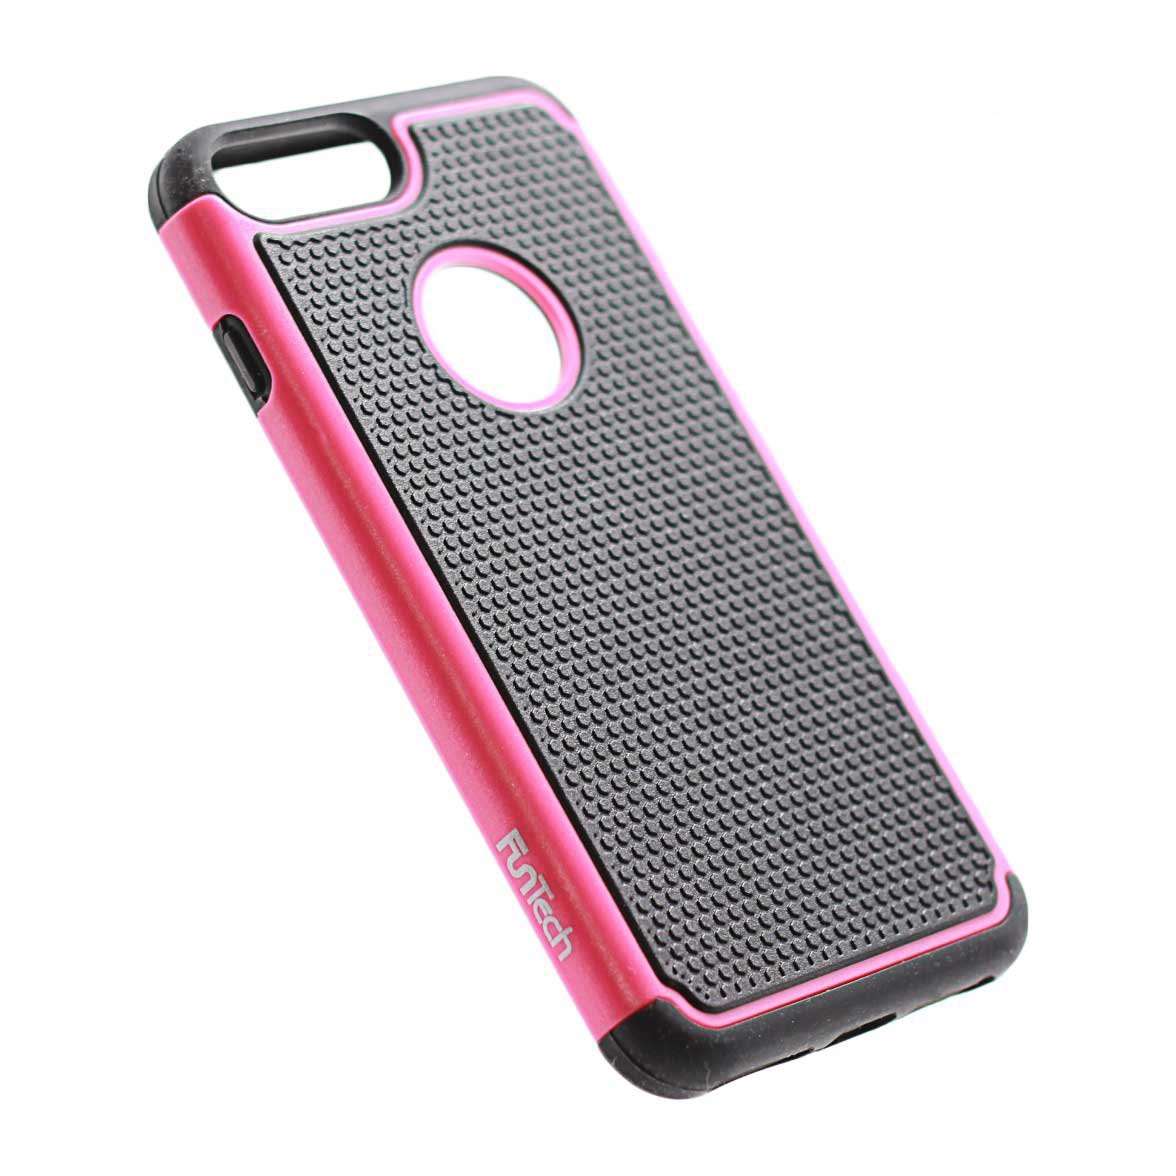 iphone 7/8 plus case football shockproof protective pink